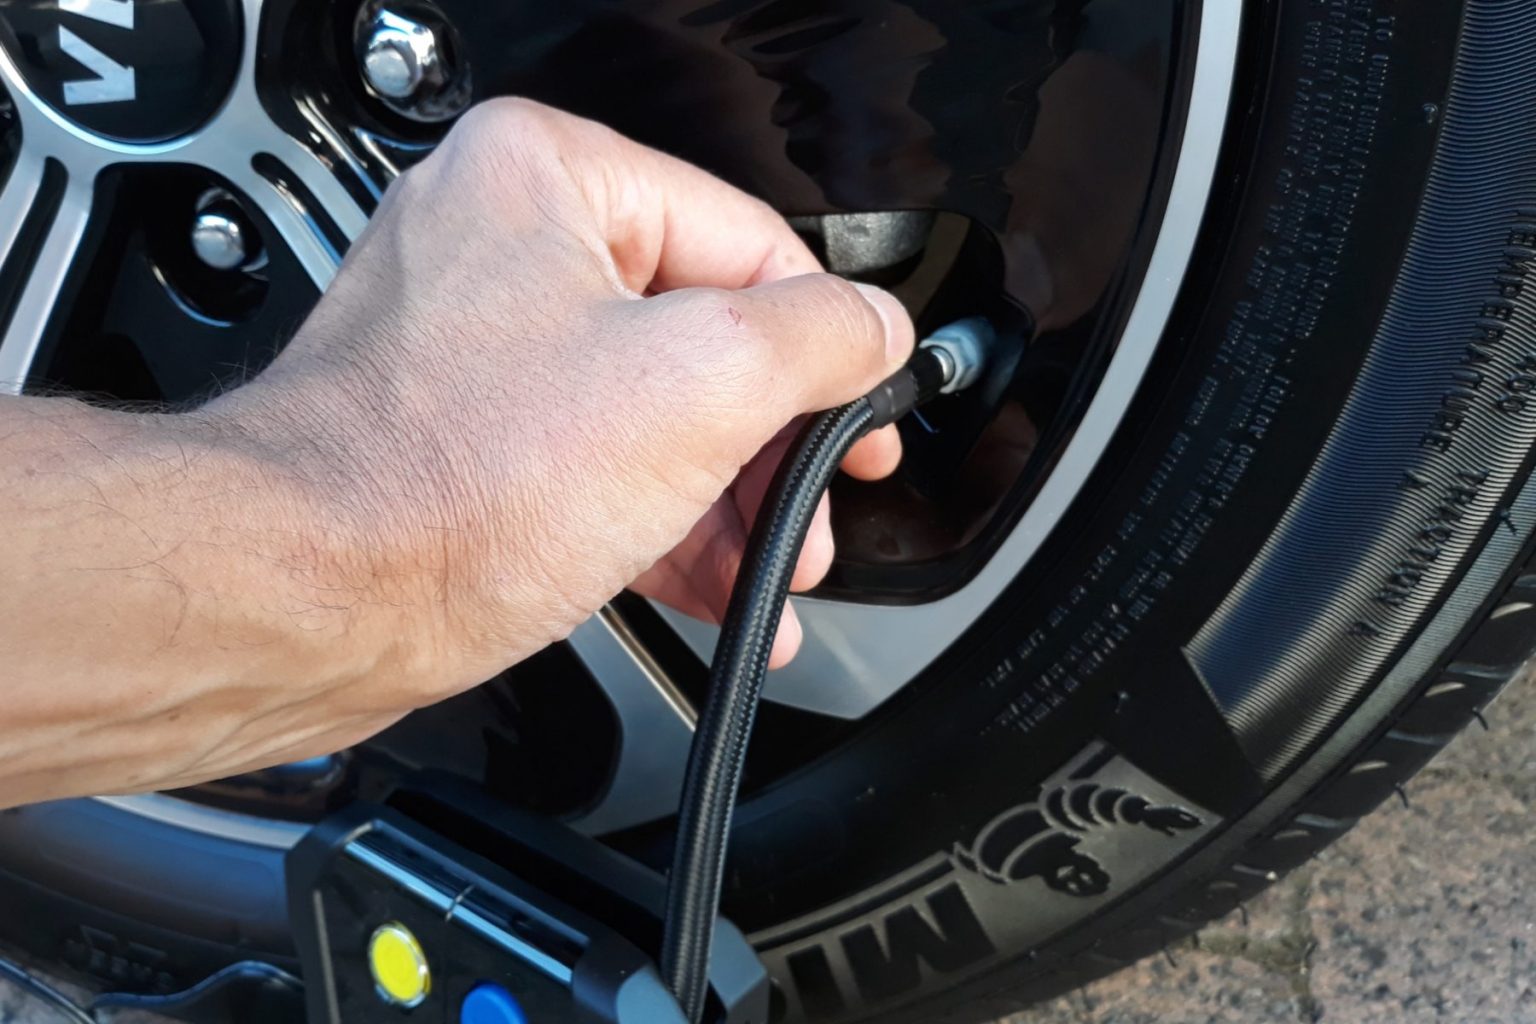 Checking and topping up tyre pressures made easy